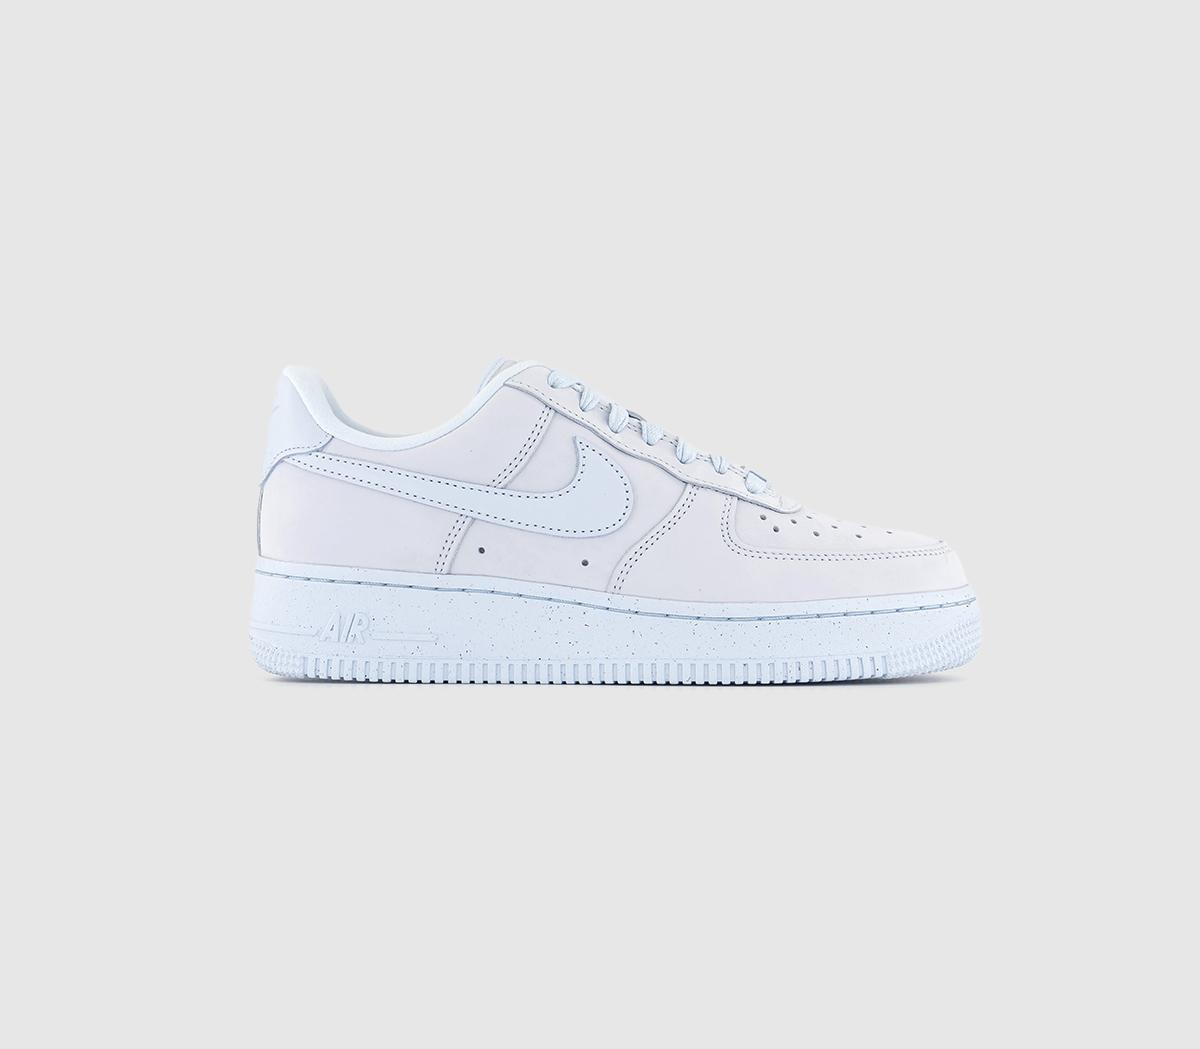 Nike Womens Air Force 1 ’07 Prm Trainers Blue Tint